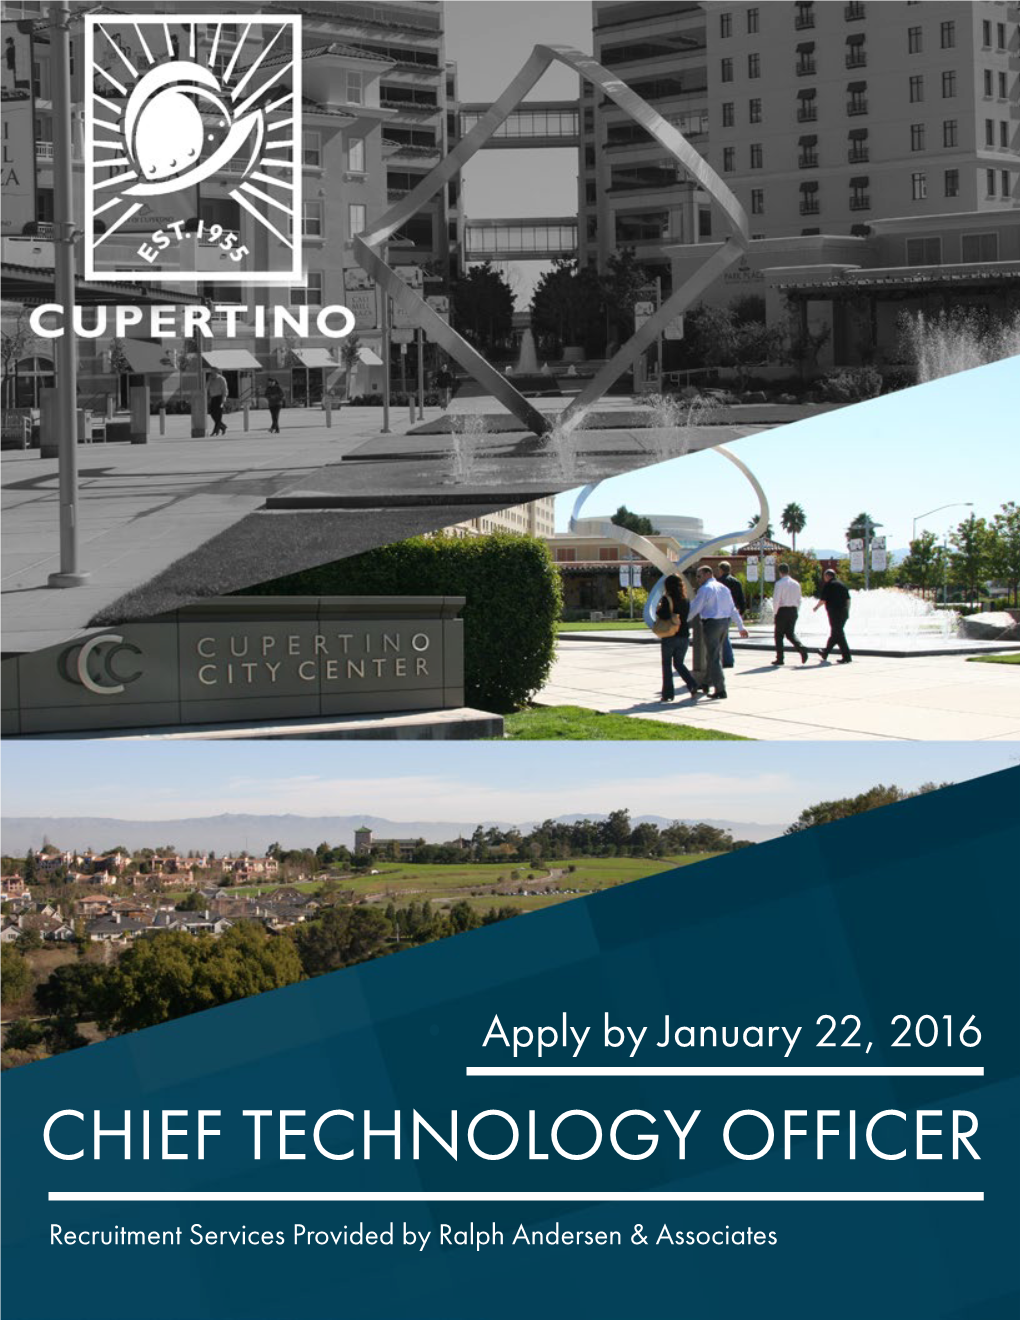 Chief Technology Officer Is $148,908 - $181,908